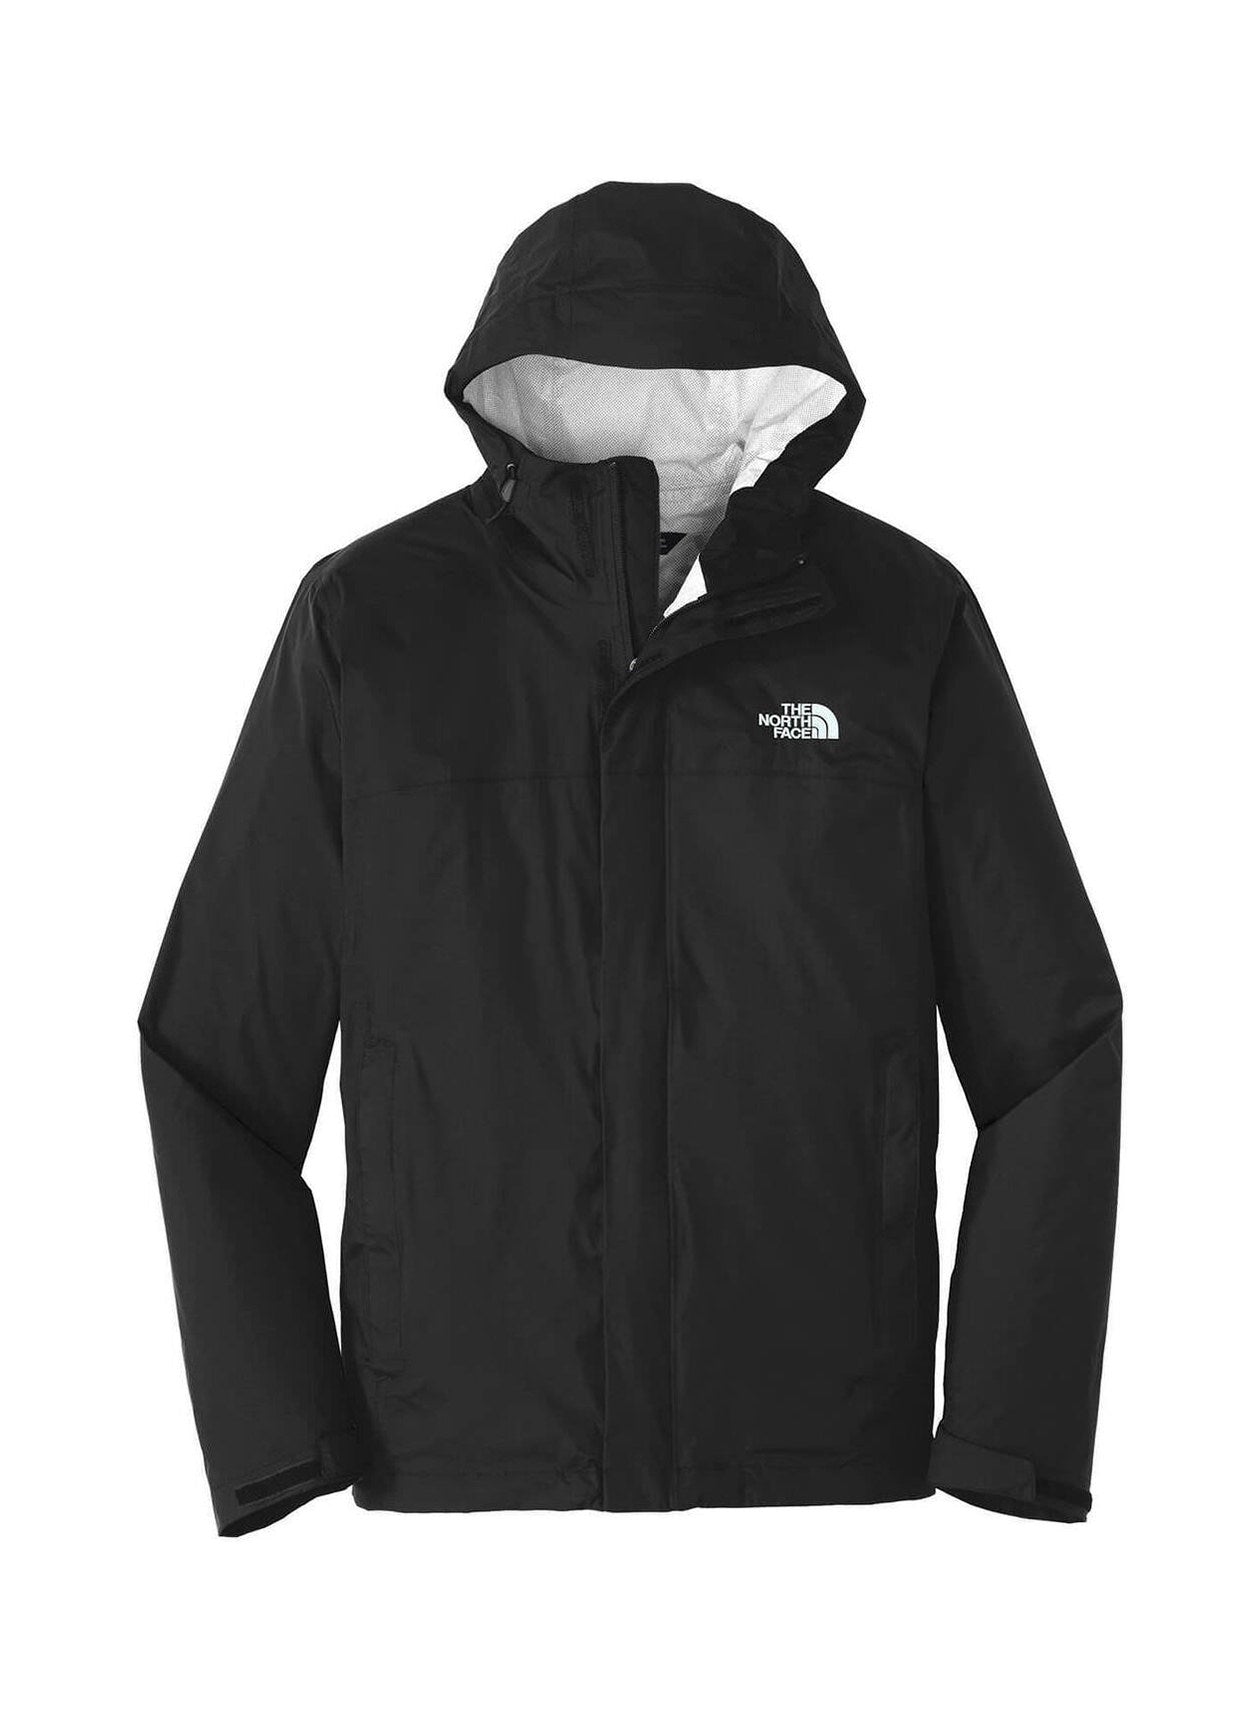 The North Face Men's TNF DryVent Rain Jacket |  The North Face 男款防雨夾克